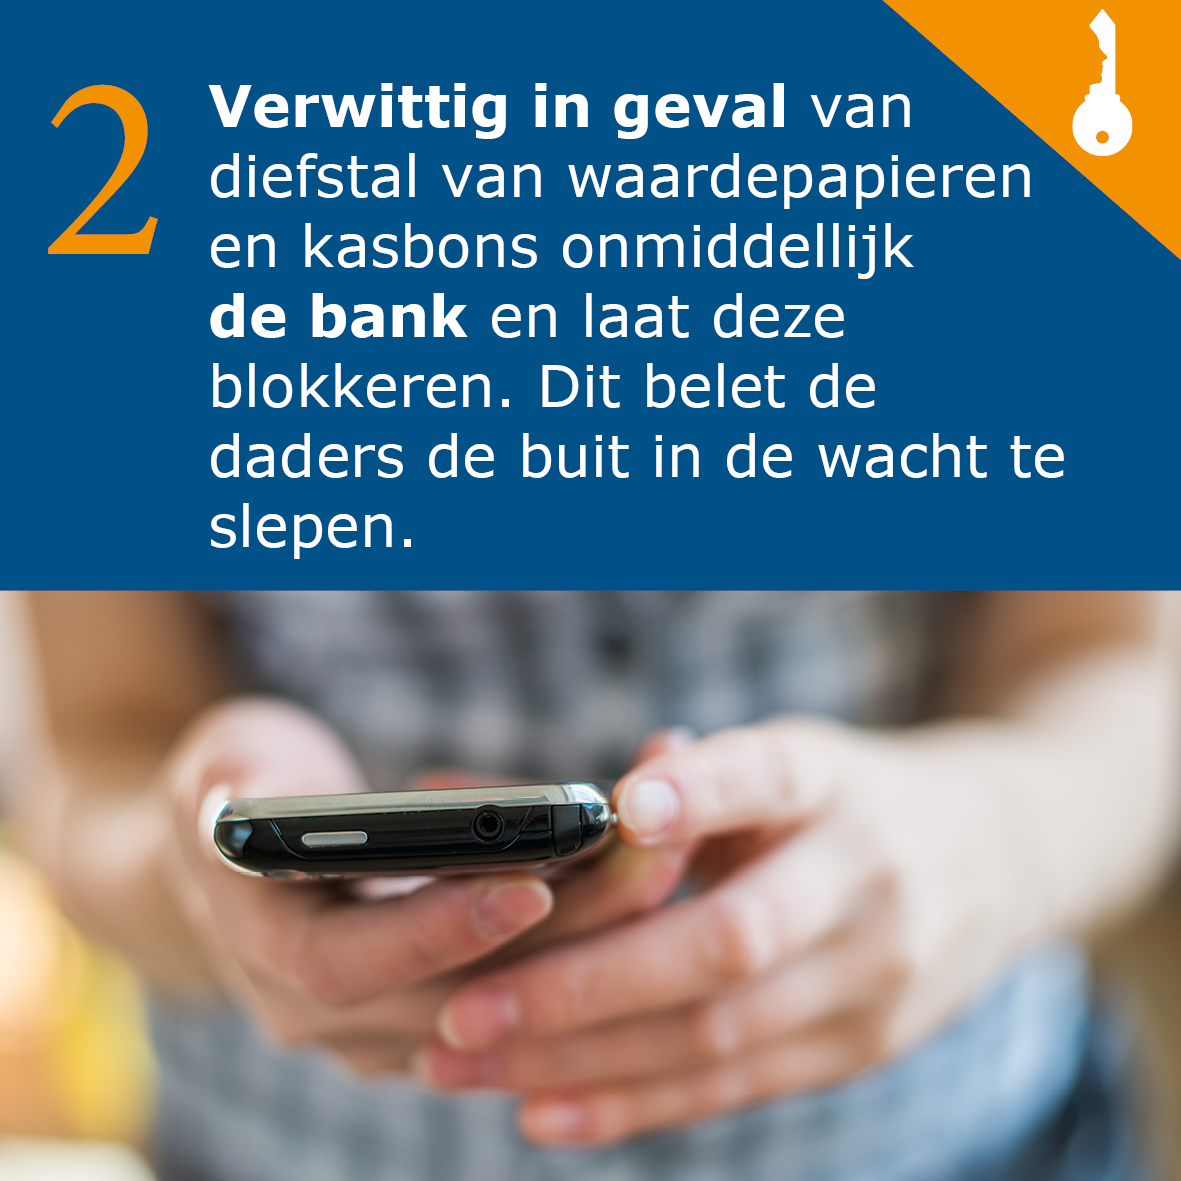 BeSafeHome_NL tweet picture